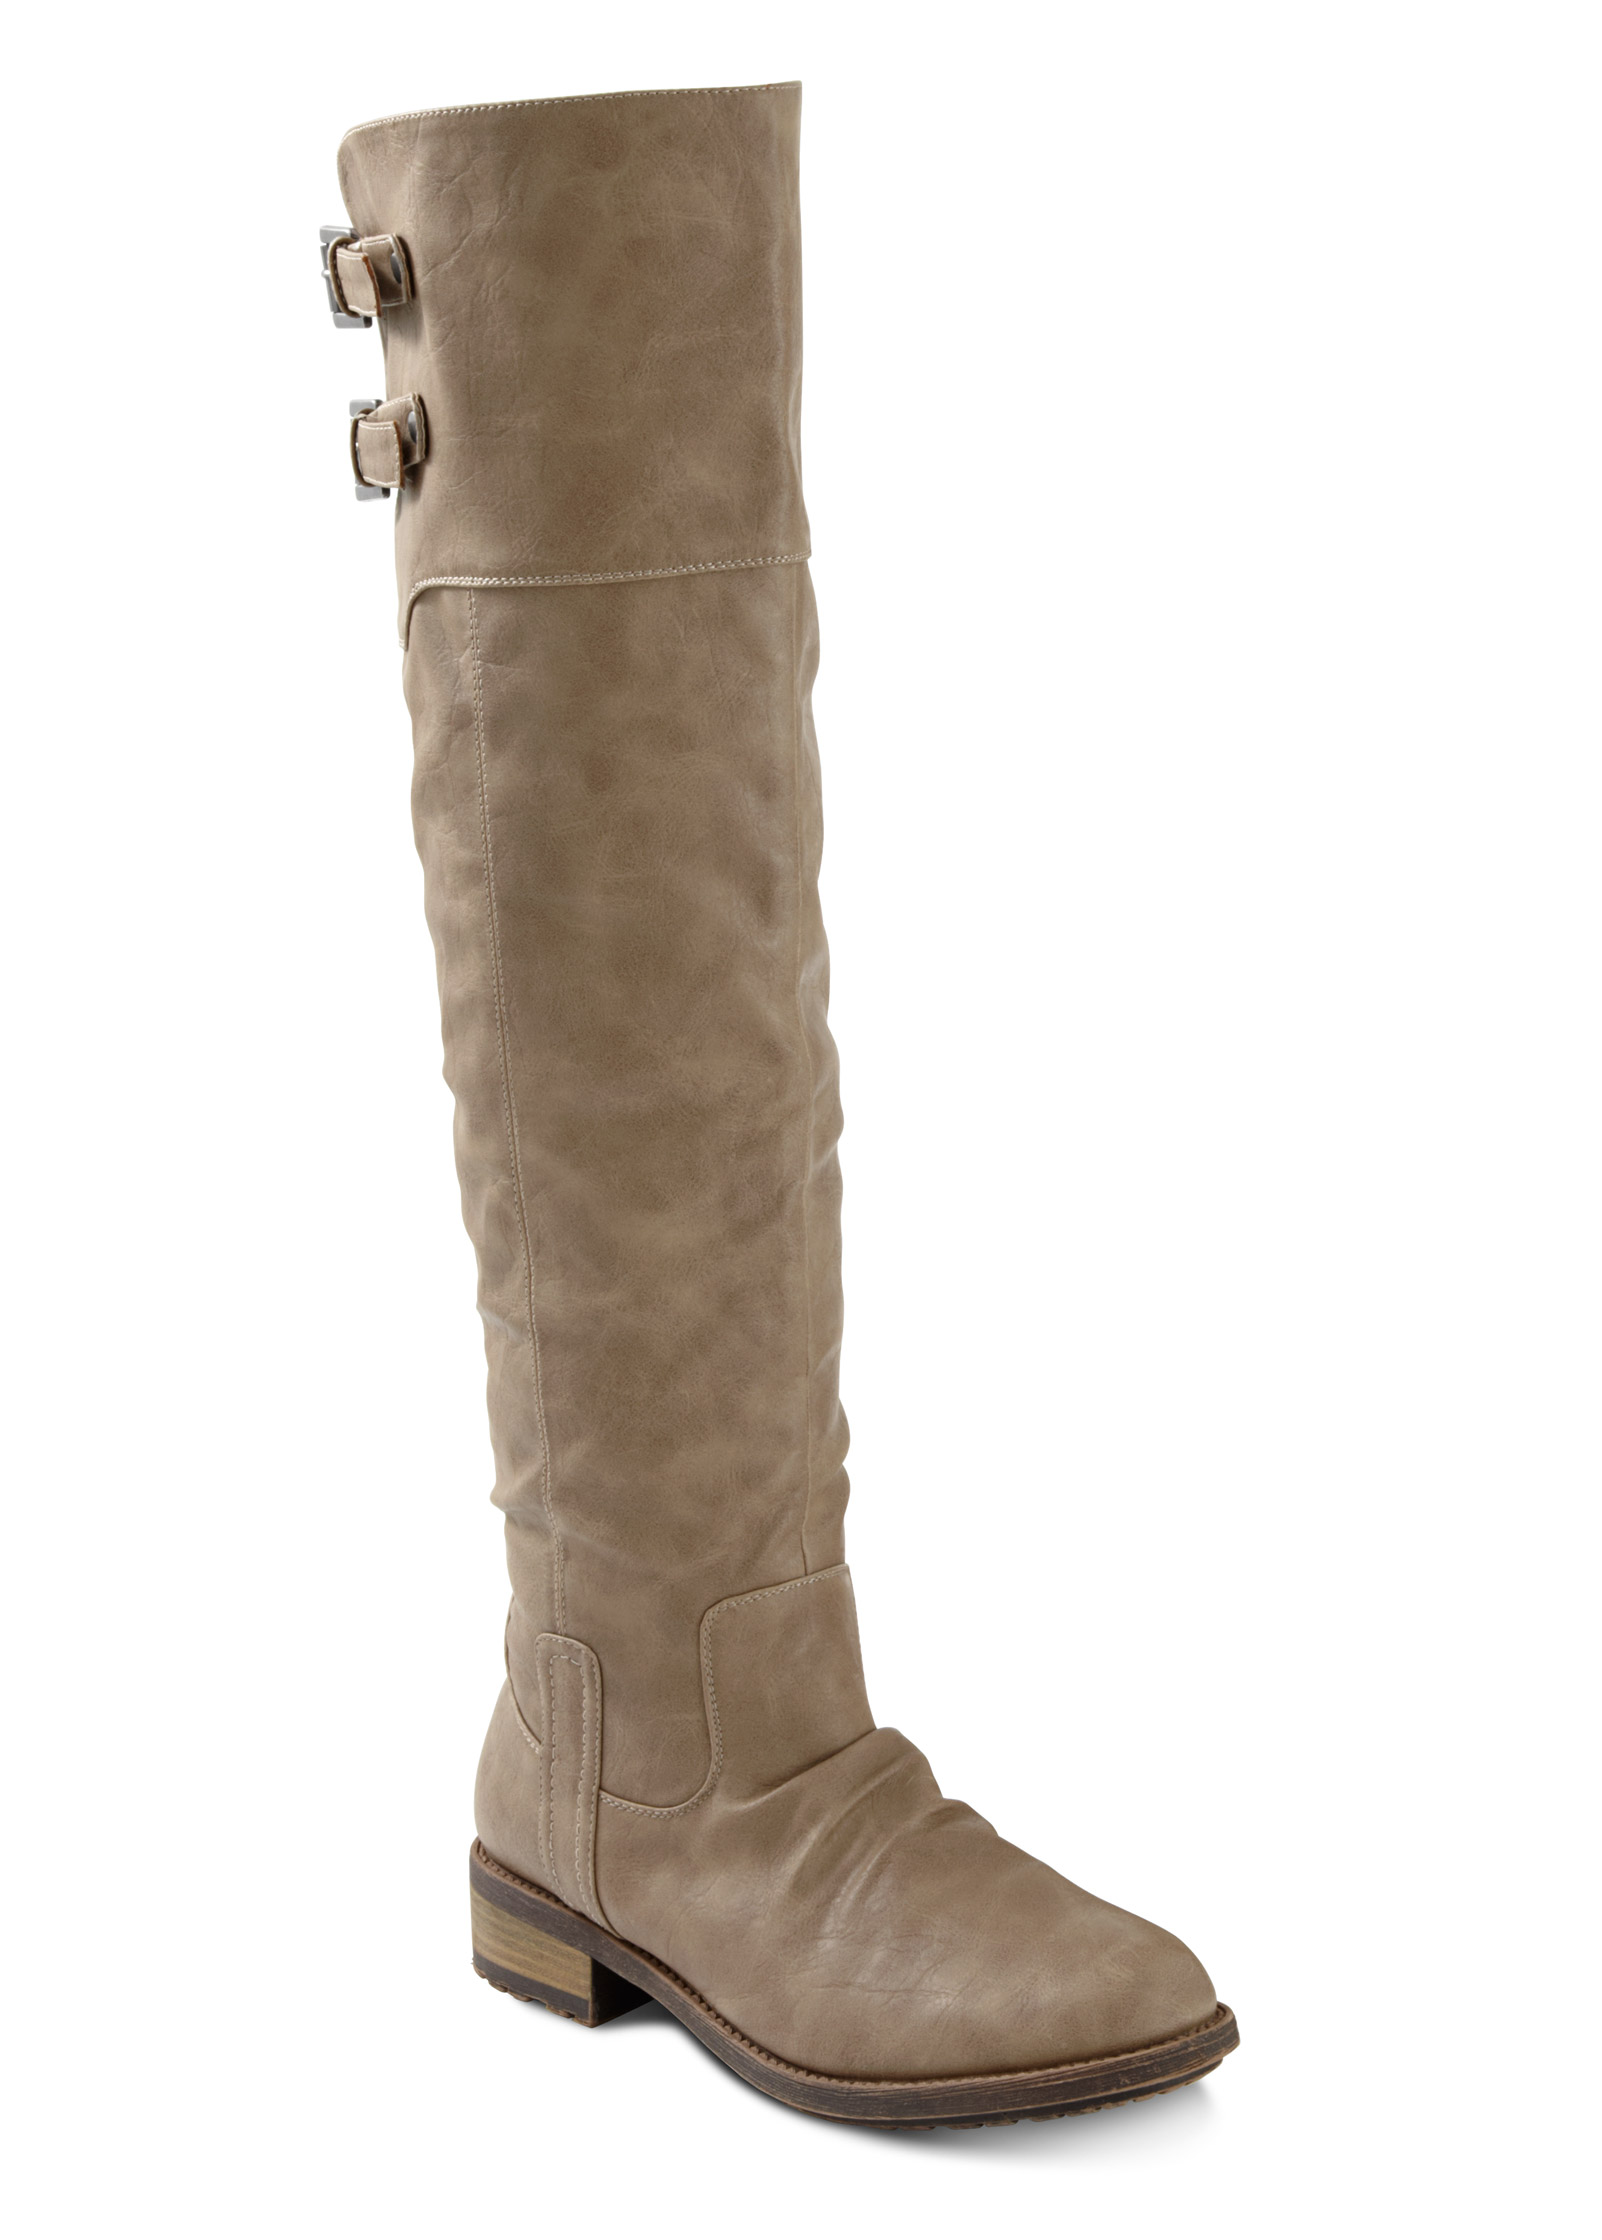 Buckle Knee High Boots in Taupe | VENUS